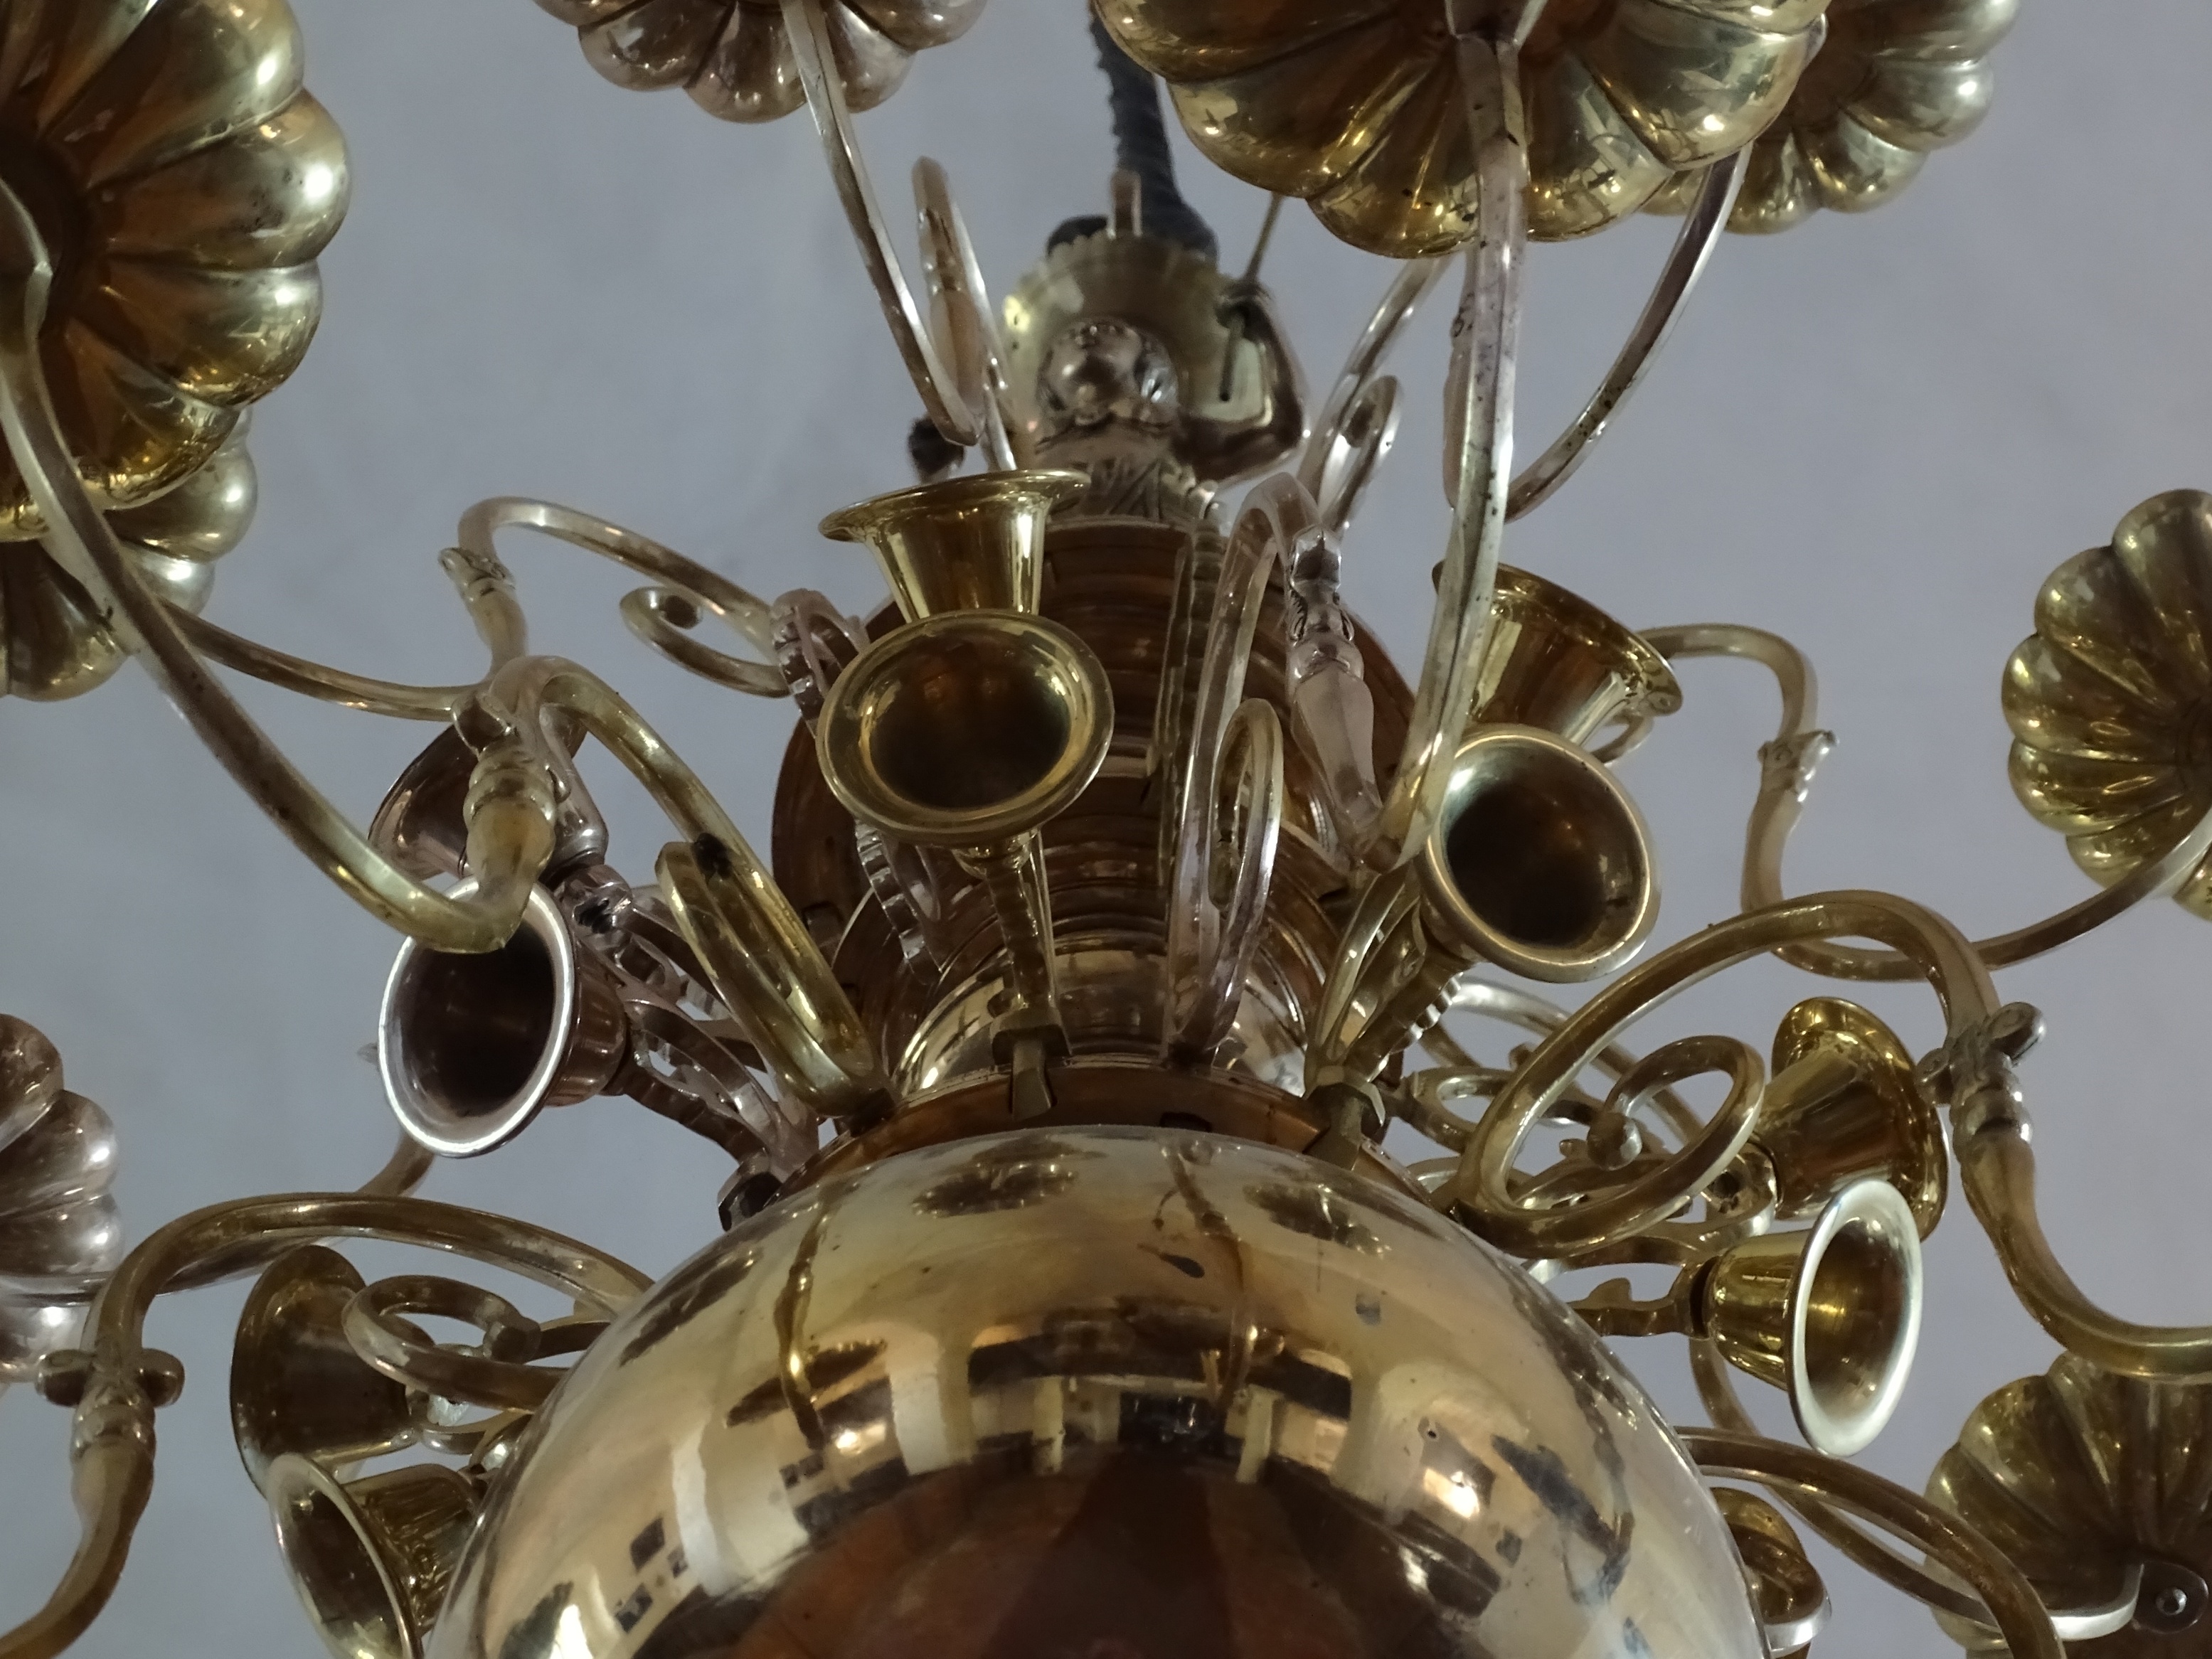 Fragment of the chandelier, 2nd half of 17th c.,  Nurme Evangelical Lutheran Church. Photo by Alantė Valtaitė-Gagač, 2021